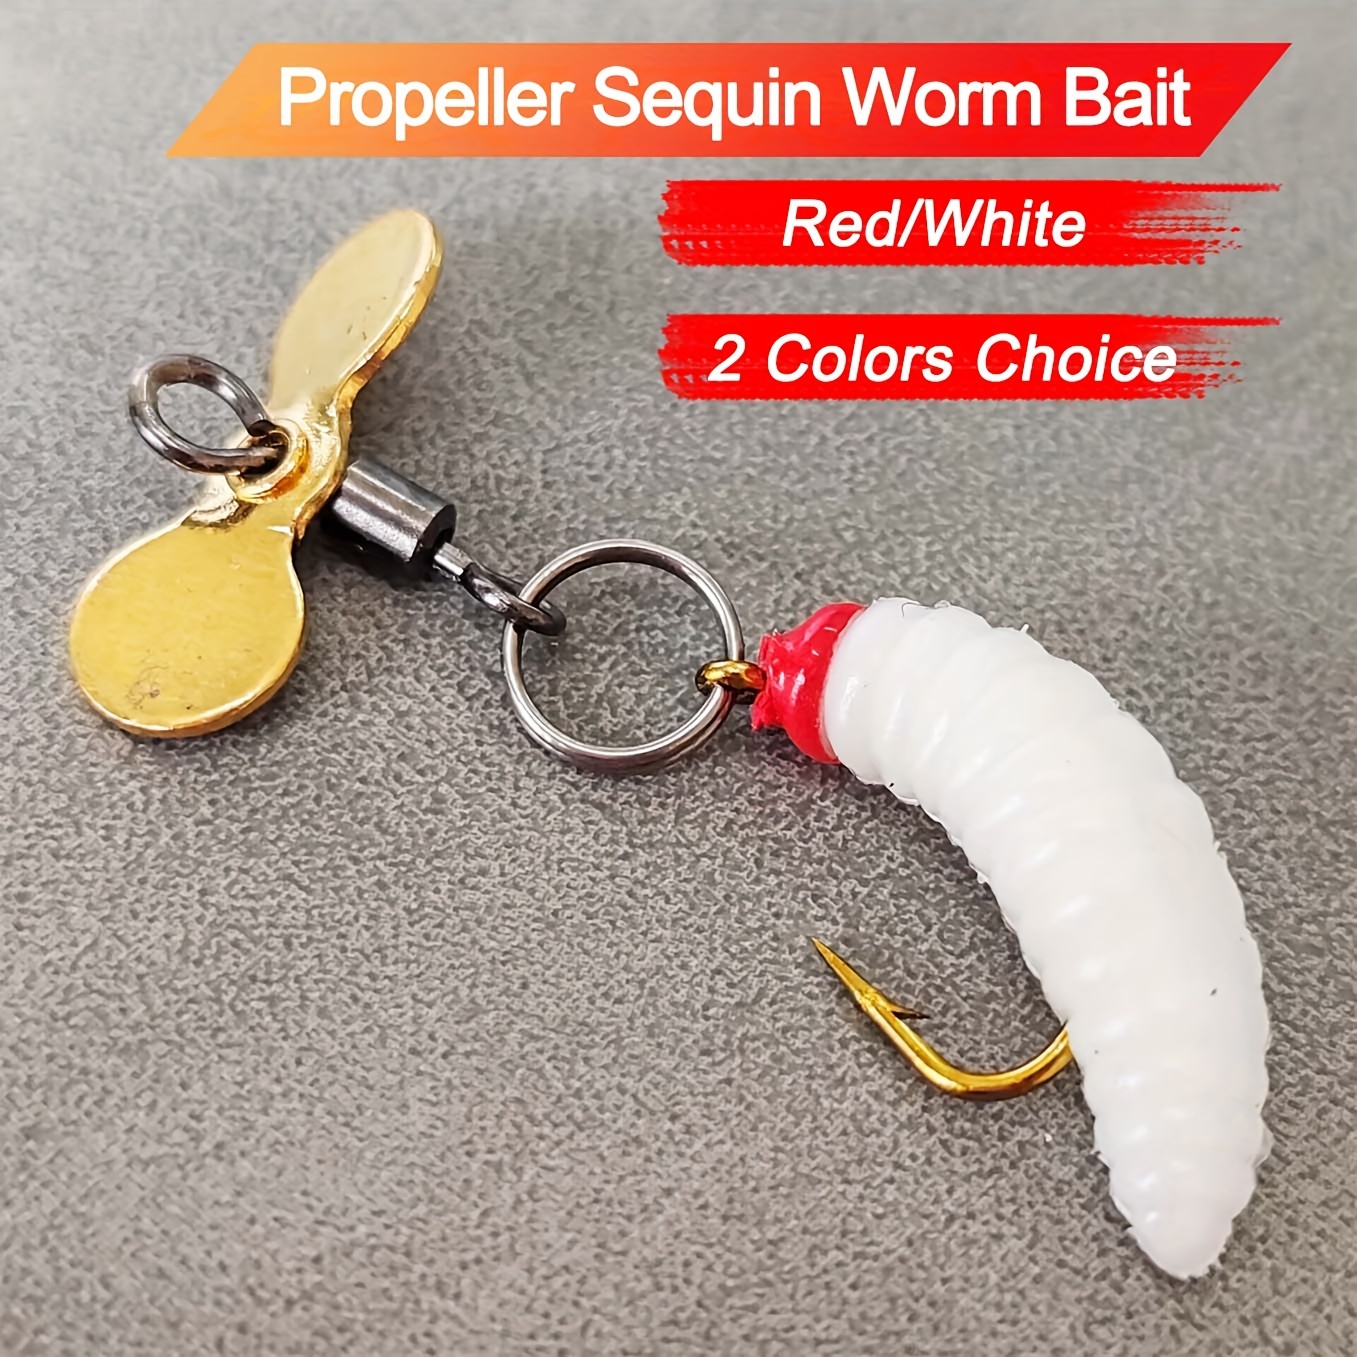 

5/10pcs Fishing Worm Bait With Propeller Blade, Fly Fishing Insect, Bionic Fishing Lure For Trout/steelhead/salmon/bass